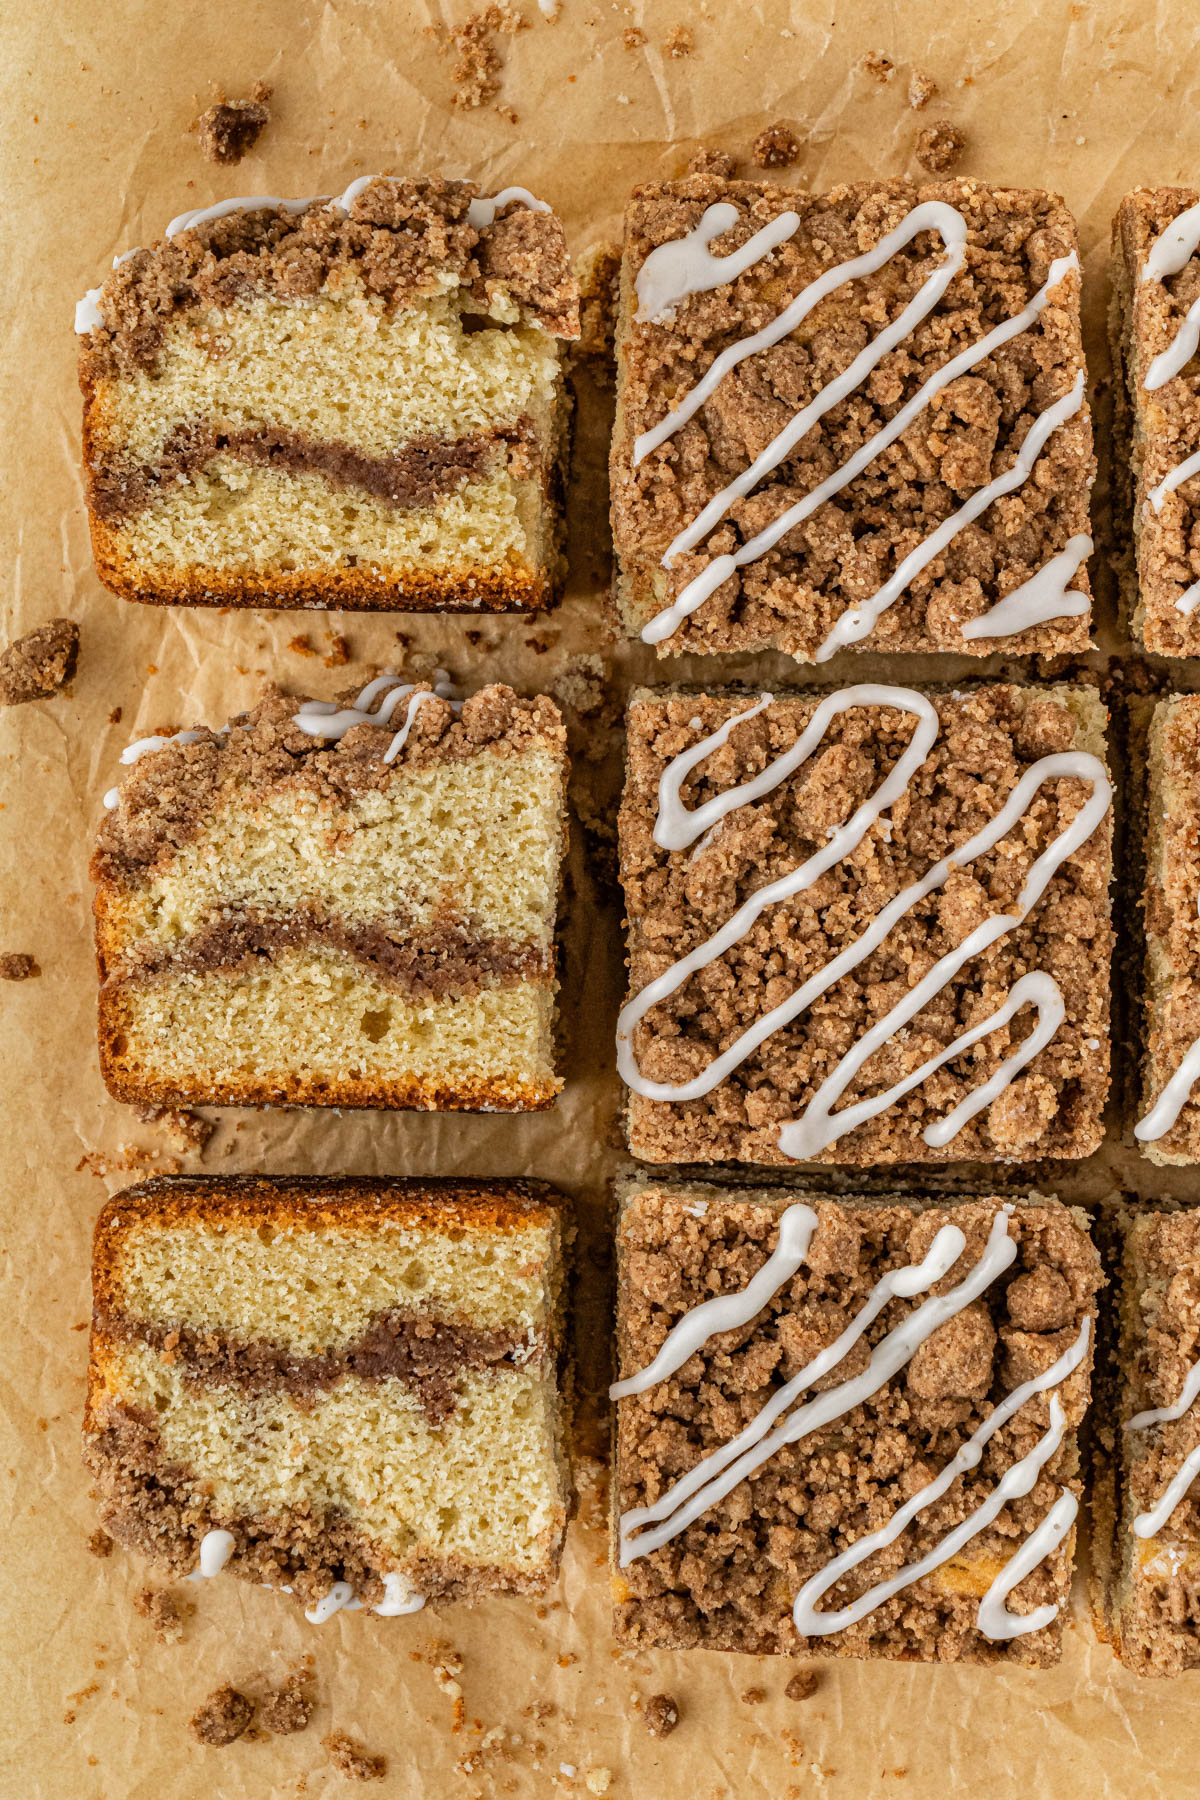 overhead view of Starbucks Coffee Cake with icing, half upright half on side